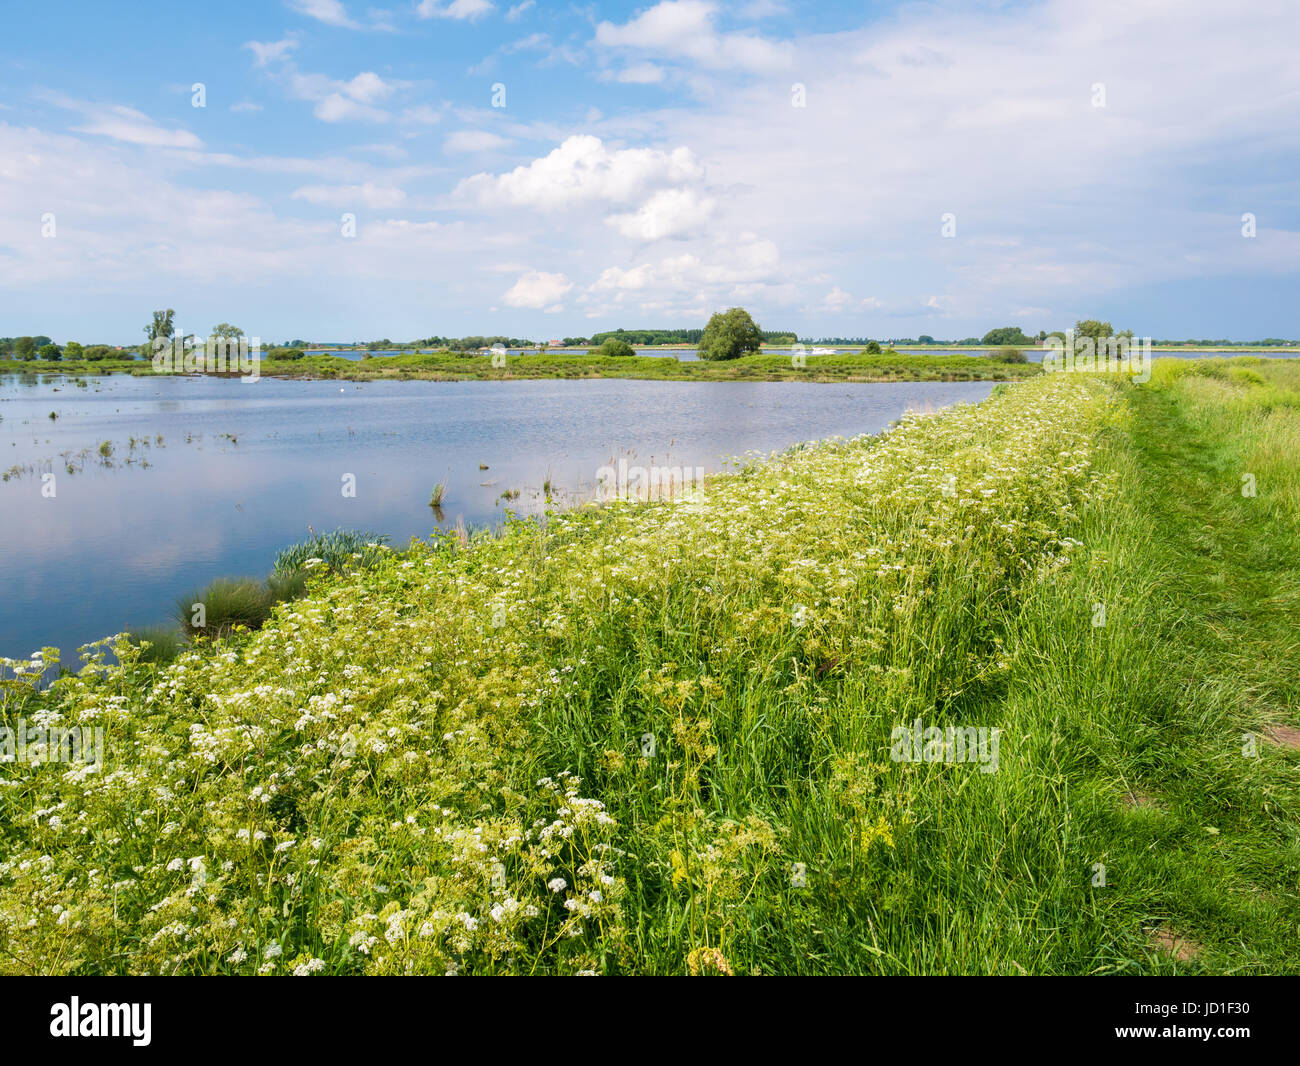 Polder landscape with dike, flowers, grass and marshy wetland on Tiengemeten island in Haringvliet estuary, South Holland, Netherlands Stock Photo